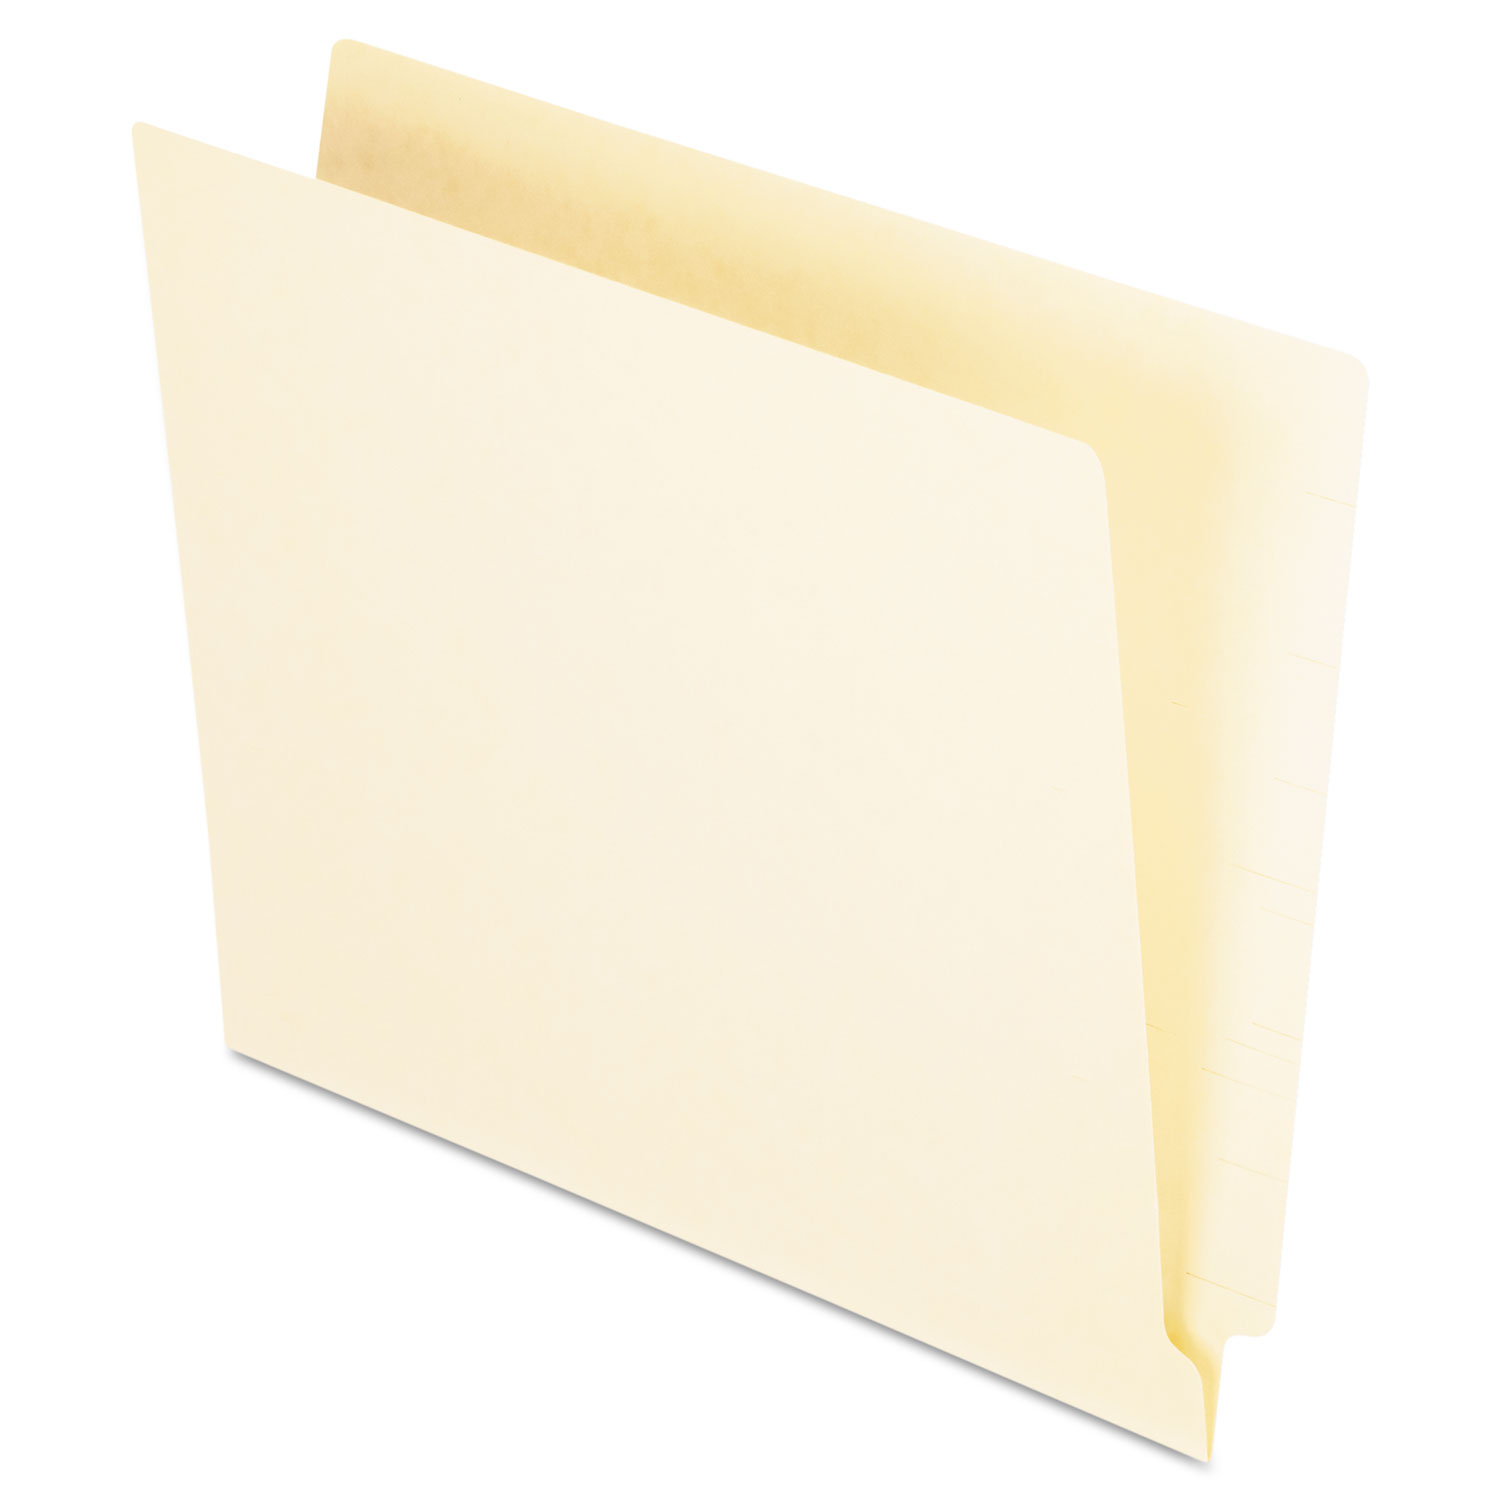  Pendaflex H110EE Manila End Tab Folders, 9.5 Front, 1-Ply Straight Tabs, Letter Size, 100/Box (PFXH110) 